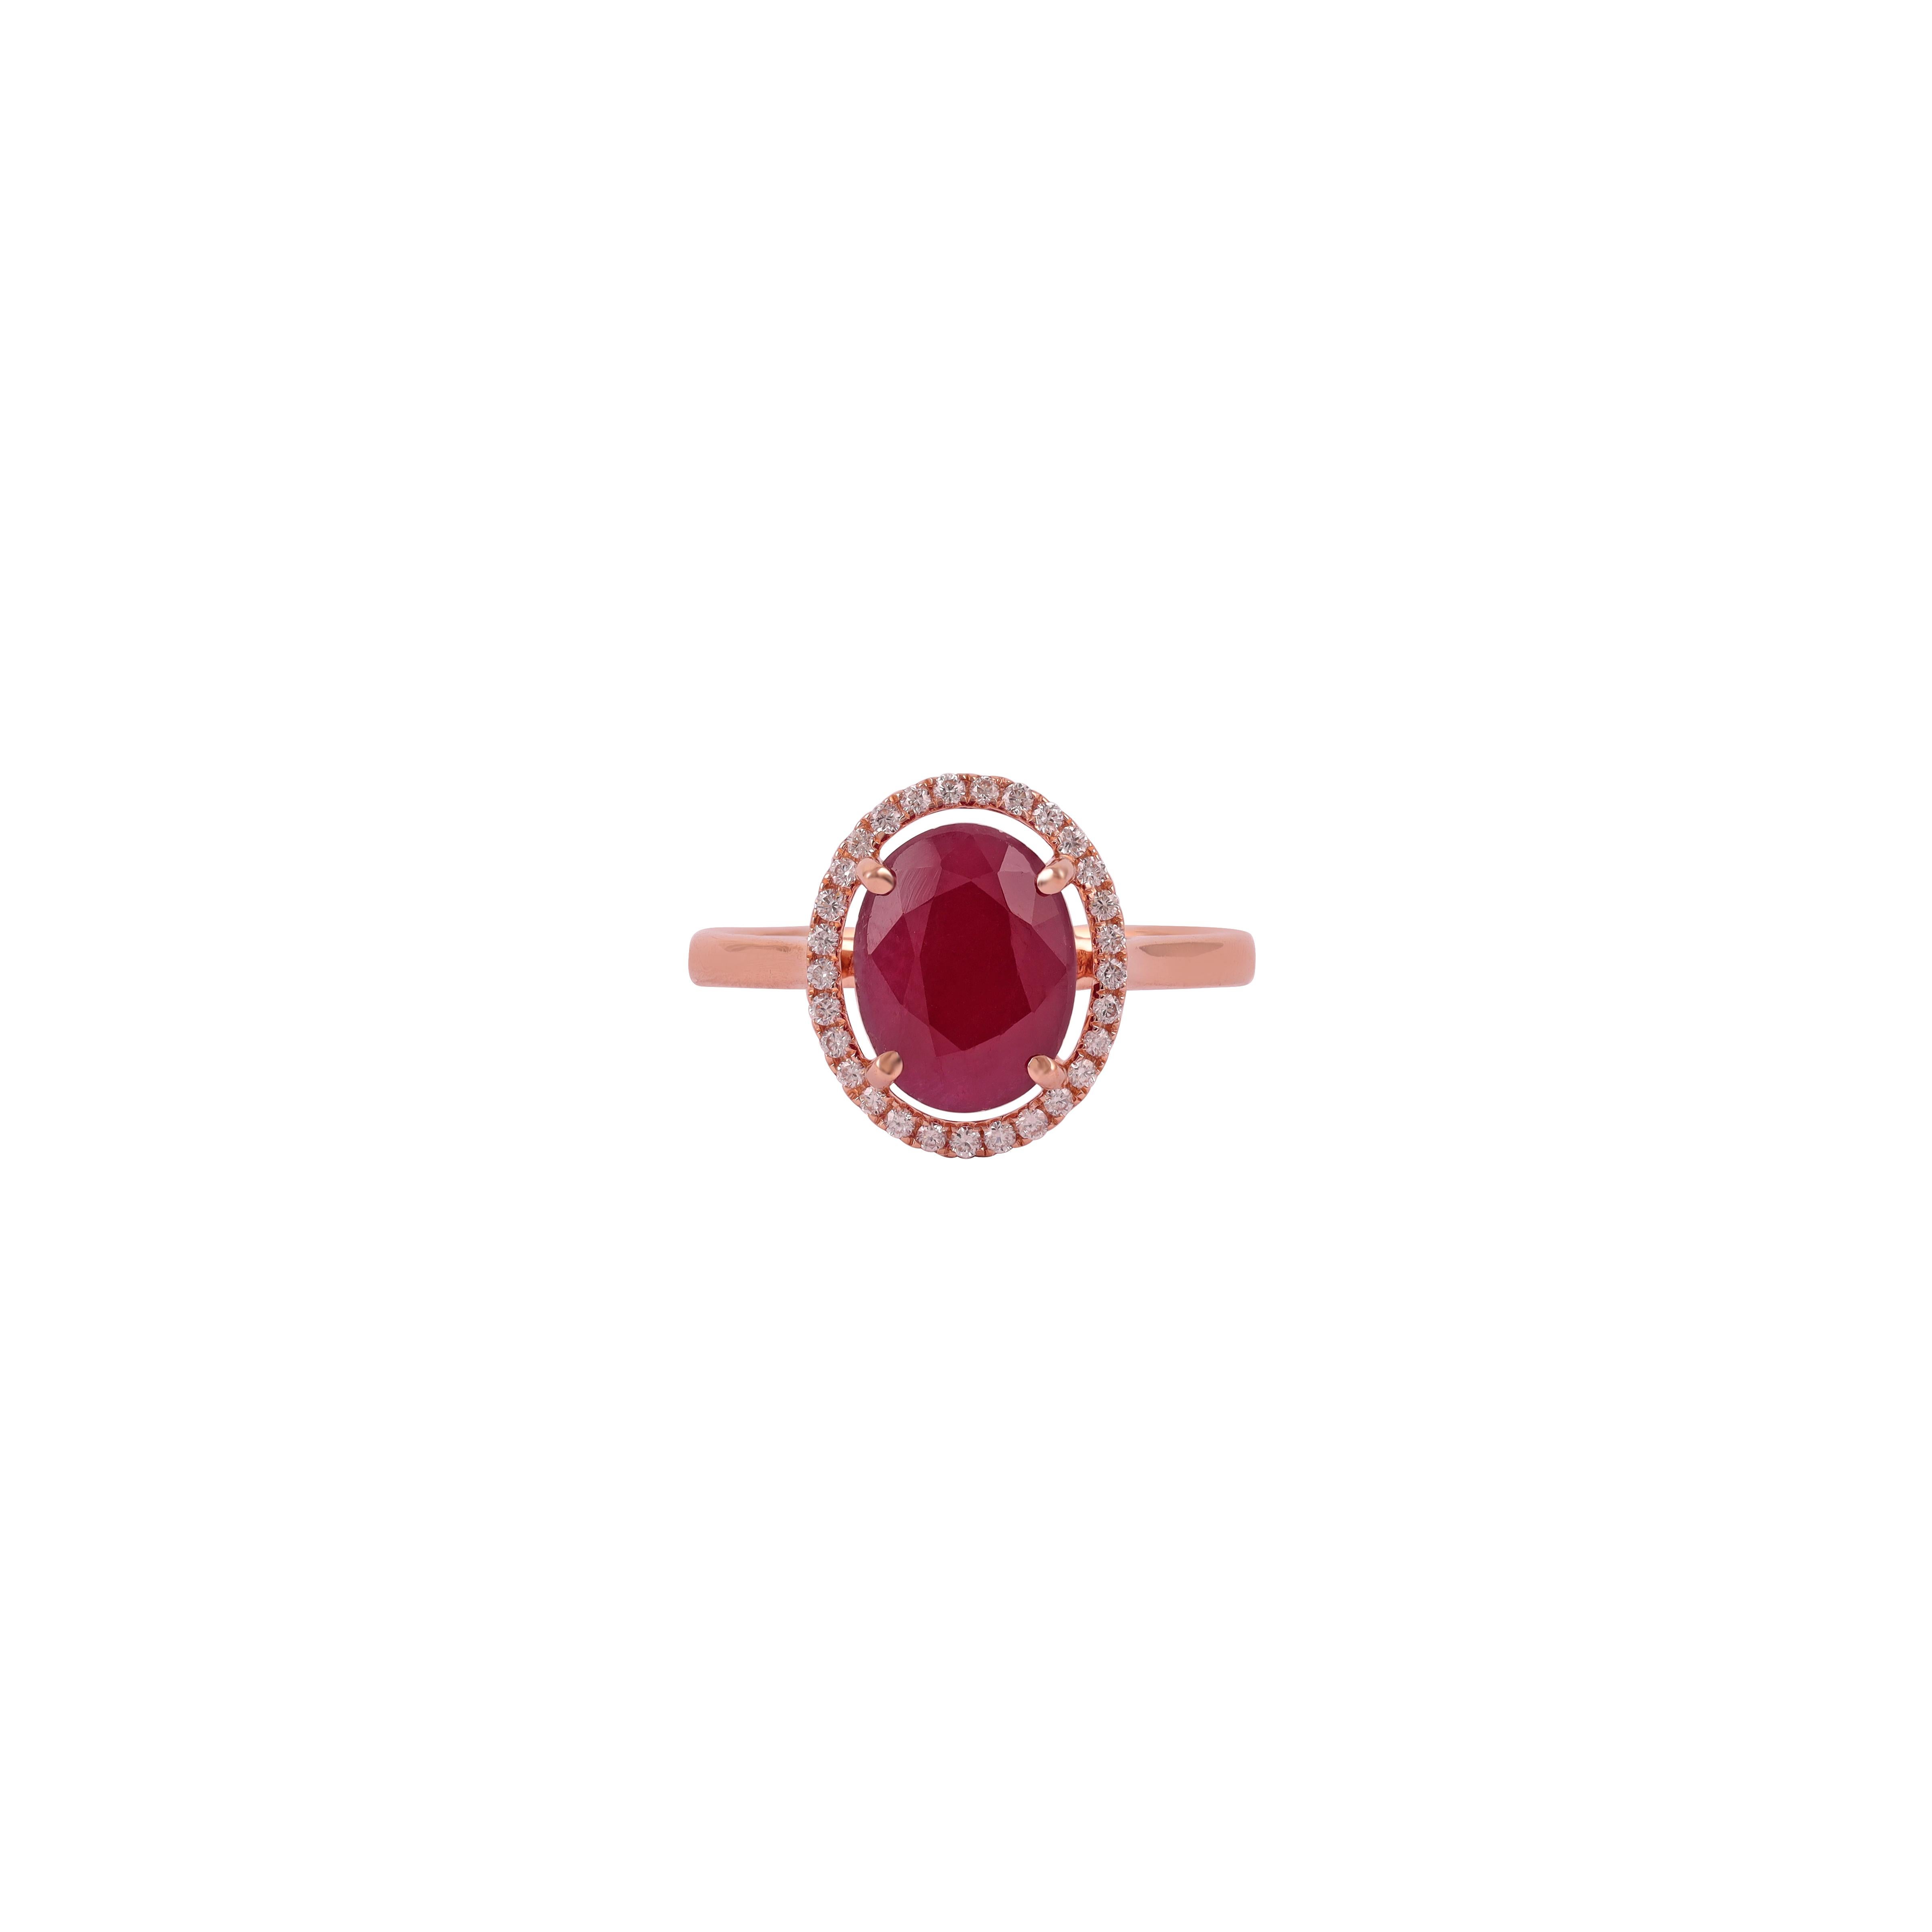 Apart of our carefully curated collection, this ring proudly displays a 3.91 Mozambique Carat Natural, Unheated Ruby Ring. The ruby's prongs hold the stone tightly but allow it to be seen in its entirety. The center stone is surrounded by beautiful